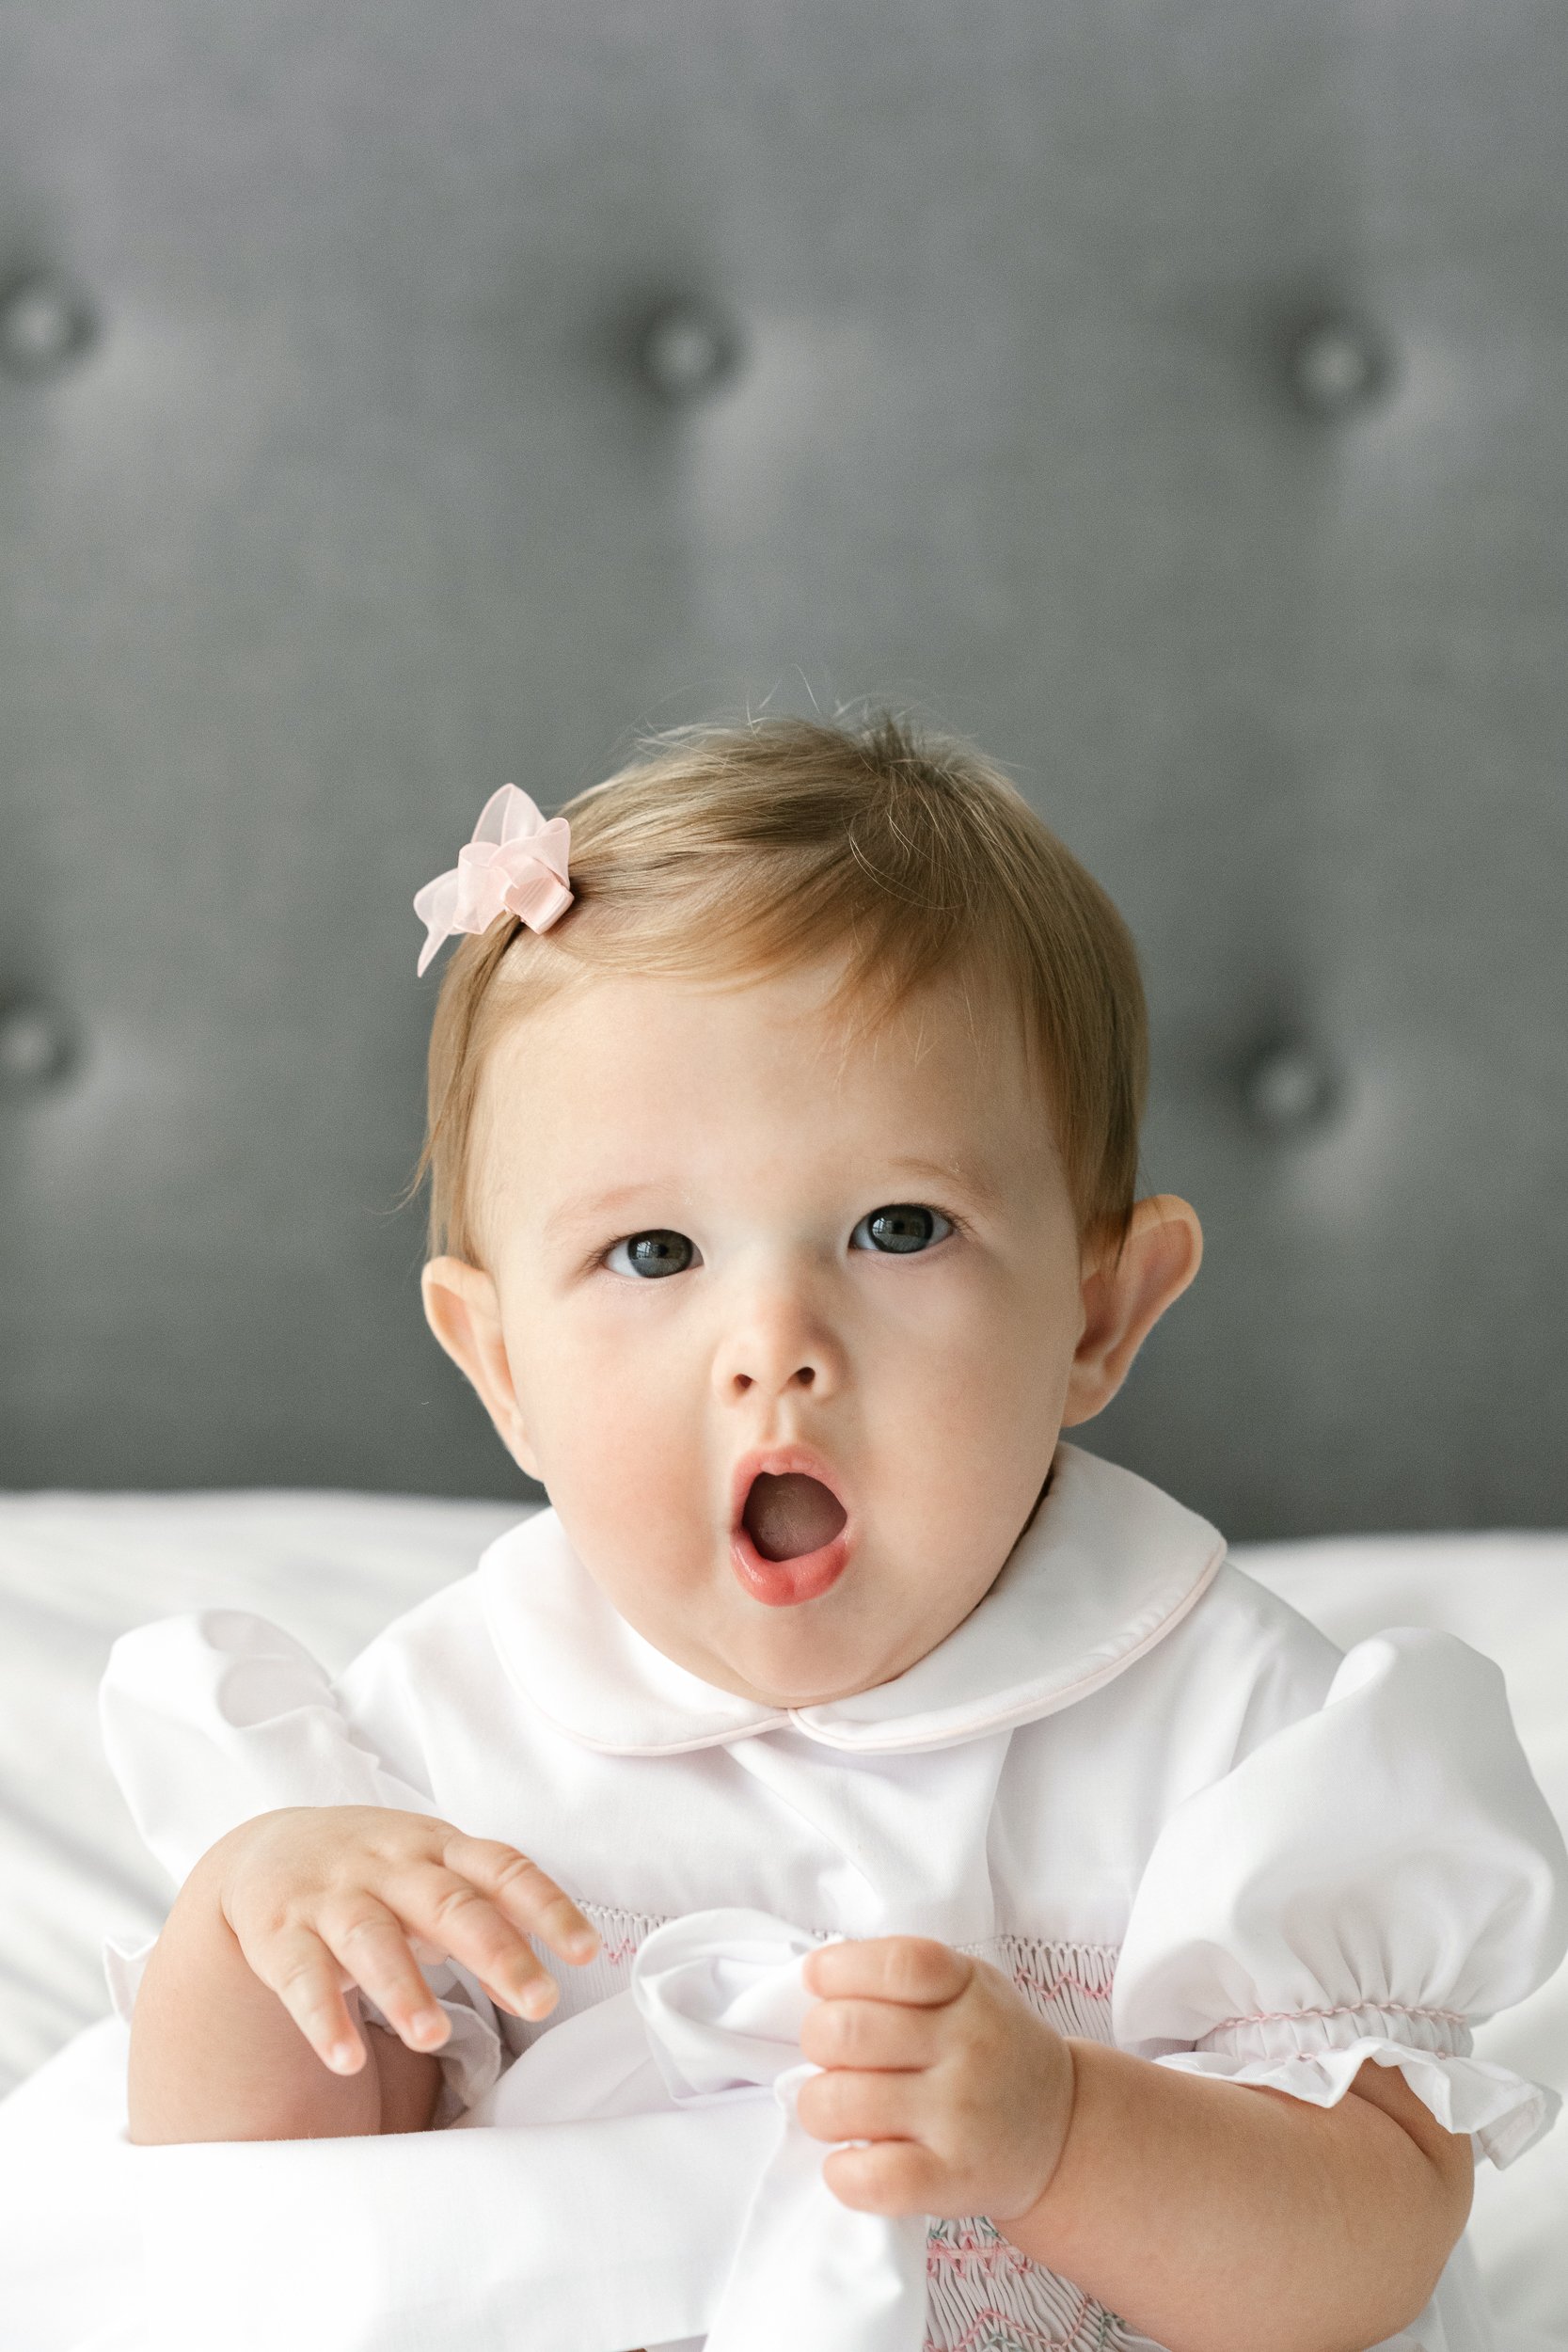  At a home session in New Jersey, a little girl makes a silly face by Nicole Hawkins Photography. white puffy sleeve dress milestone portraits #nicolehawkinsphotography #newjerseyphotographers #familyphotographer #6monthportraits #NJfamilyphotos 